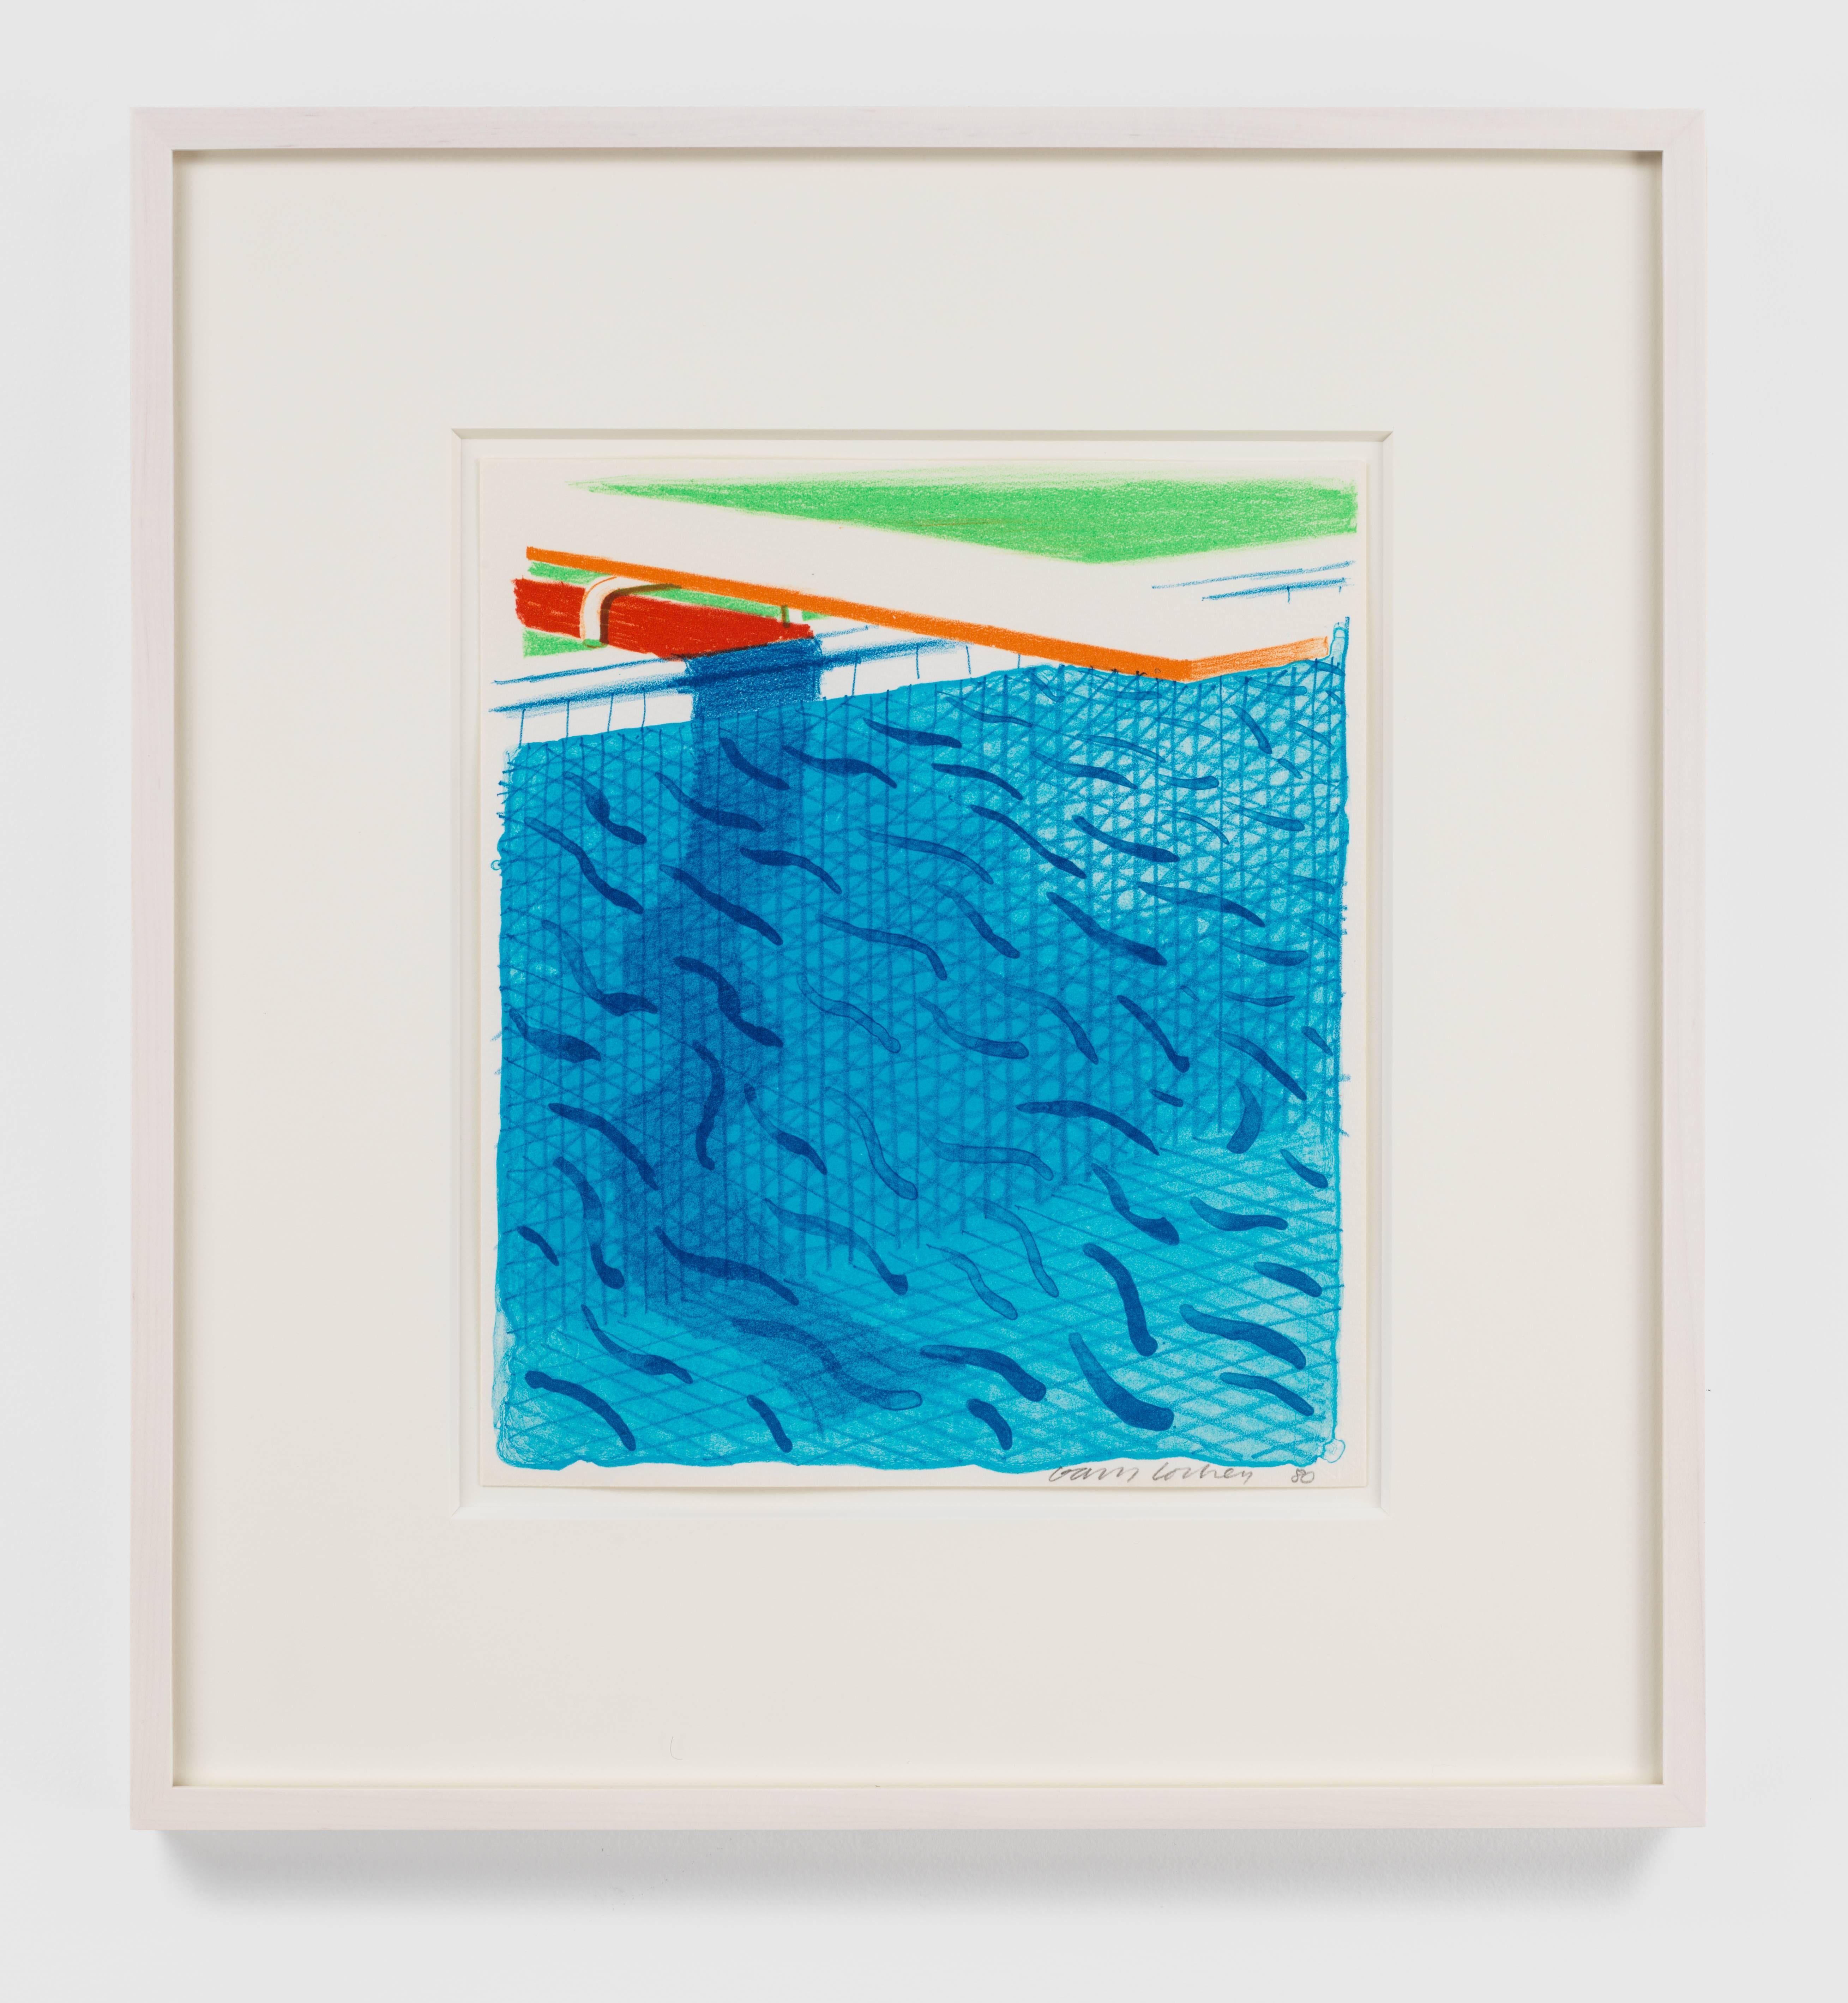 Pool Made with Paper and Blue Ink for Book of Paper Pools - Print by David Hockney